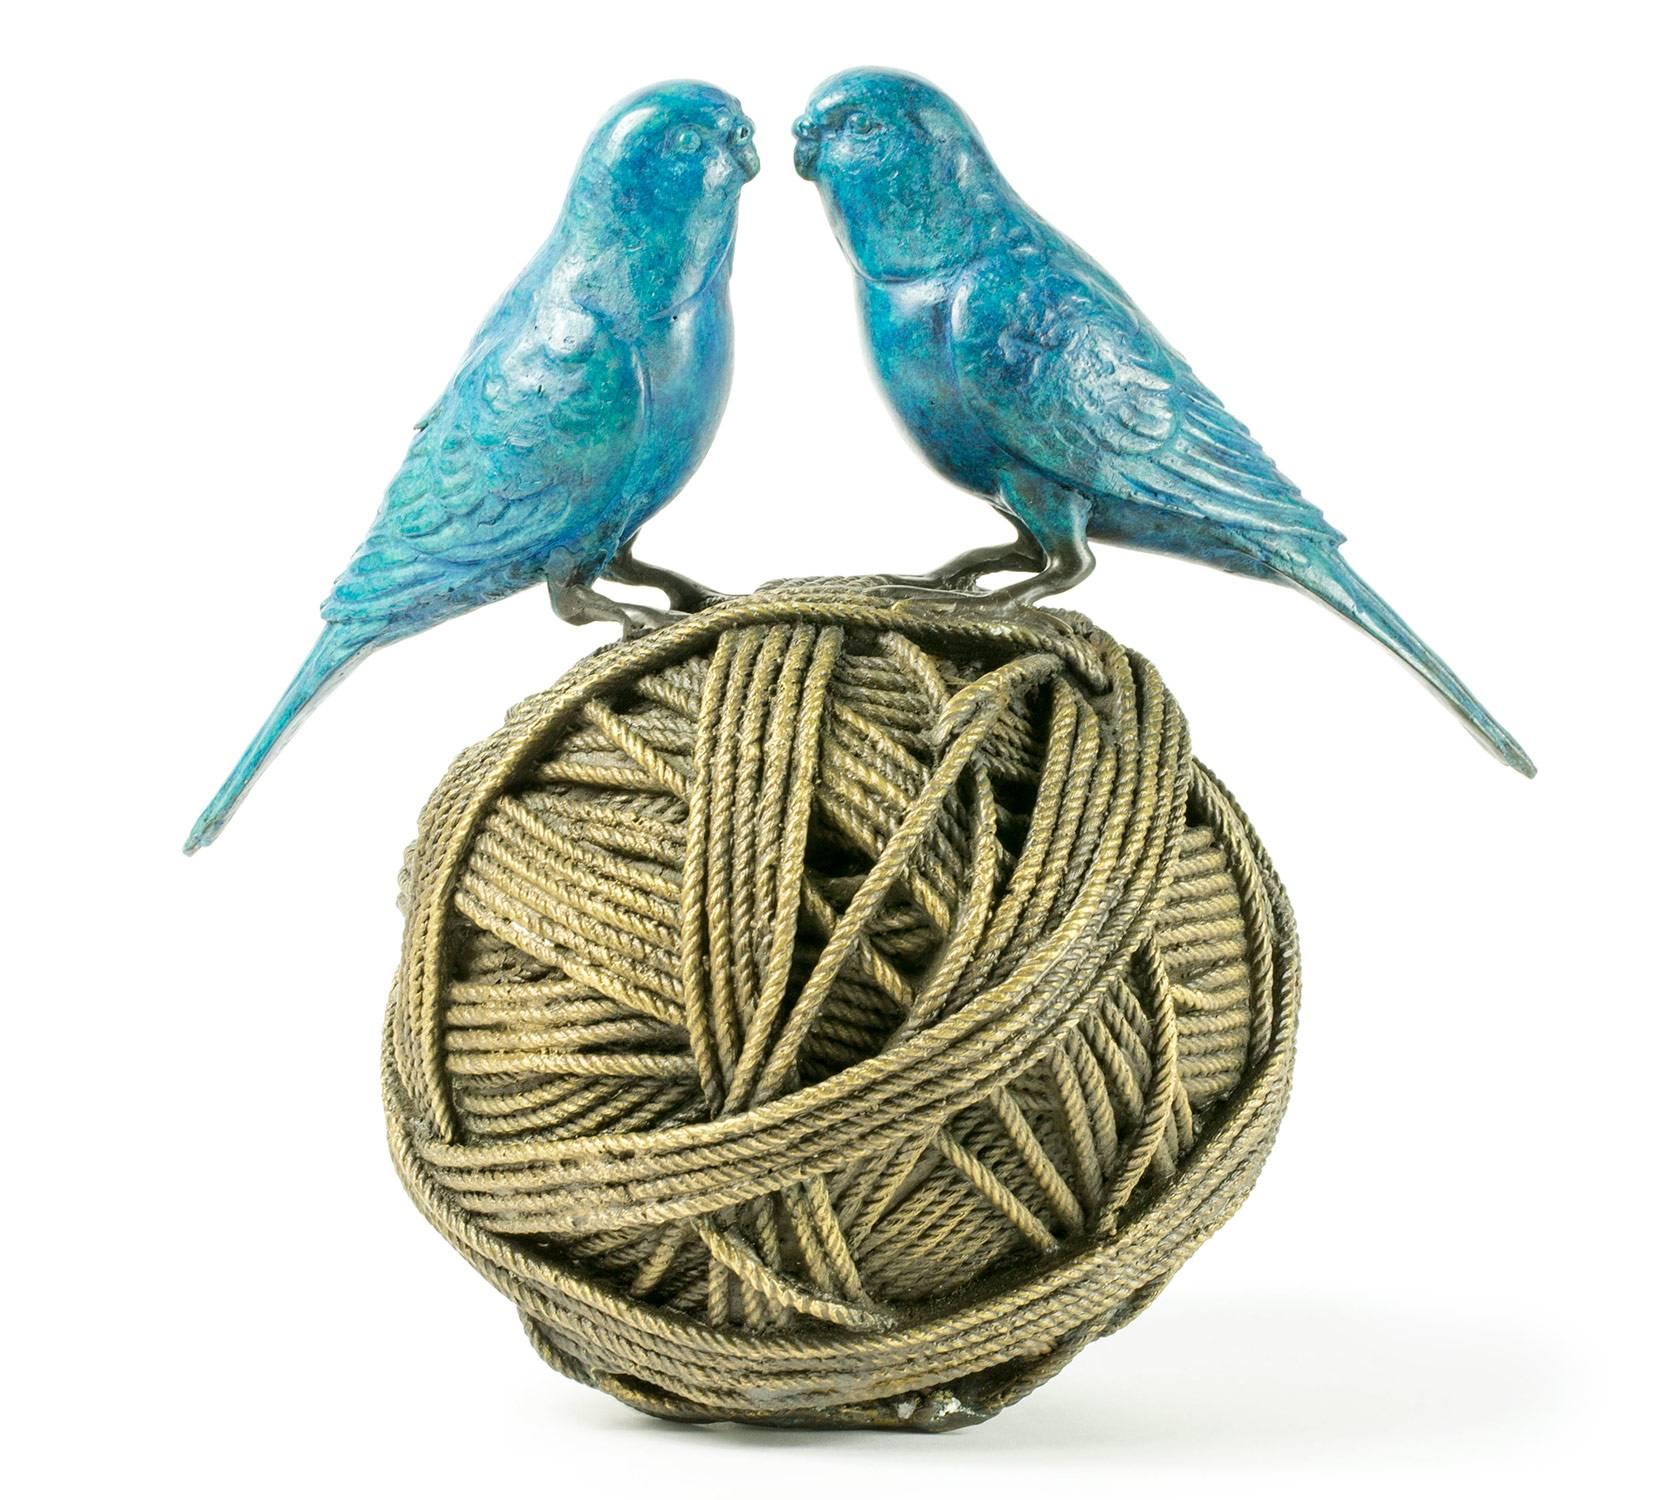 Gillie and Marc Schattner Abstract Sculpture - Life's a Ball (2 Budgies on ball)